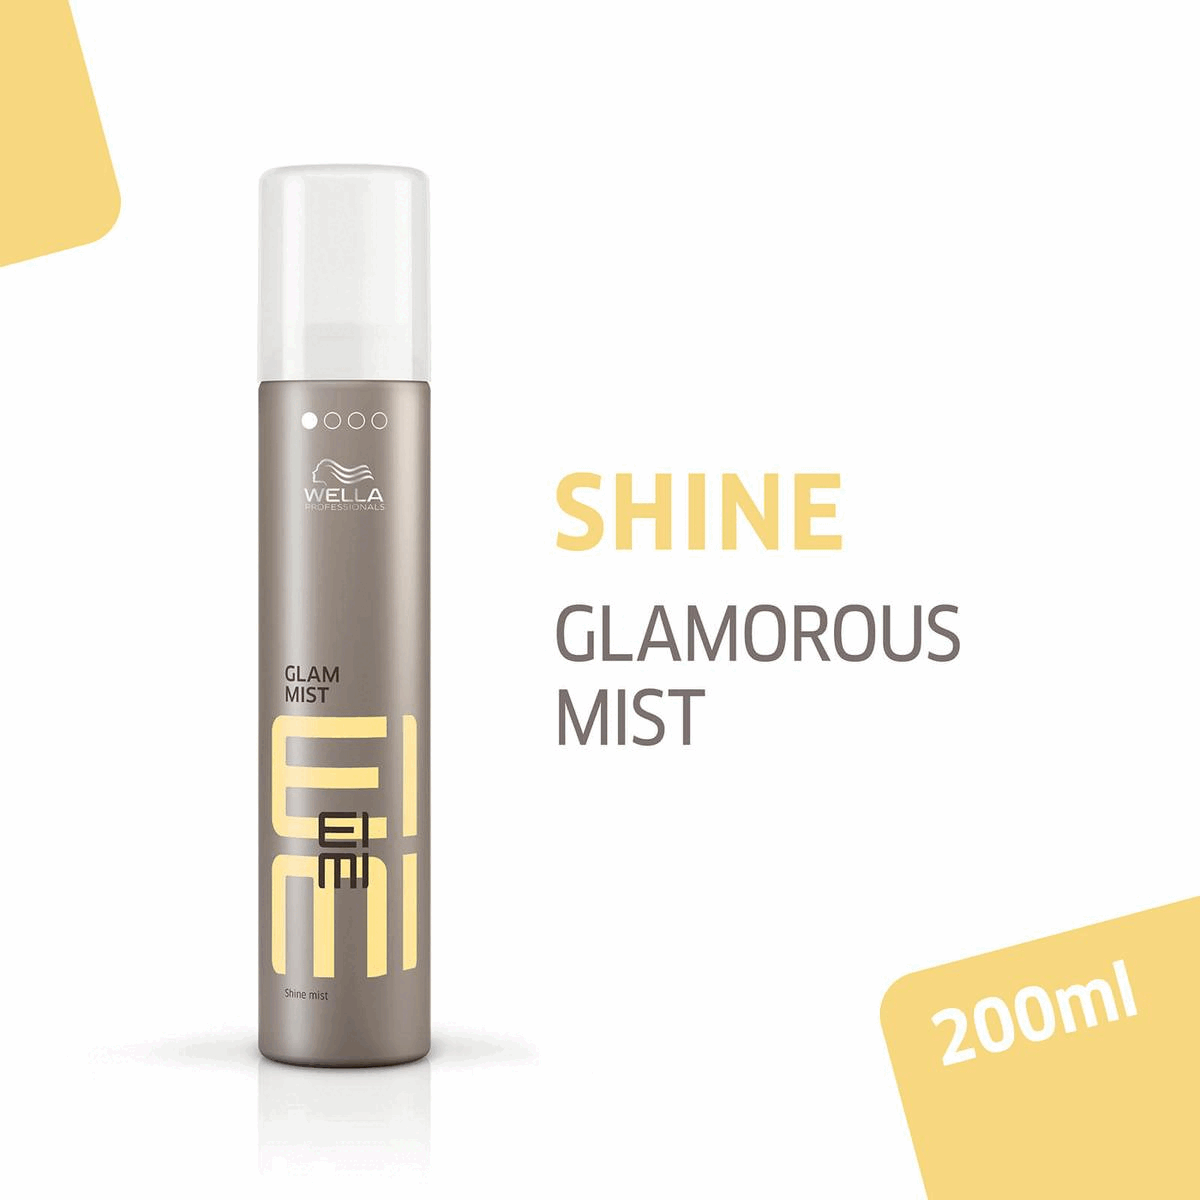 shine glamorous mist. glamorous shine. citrus scent. partner recommendation sold separately. discover other products